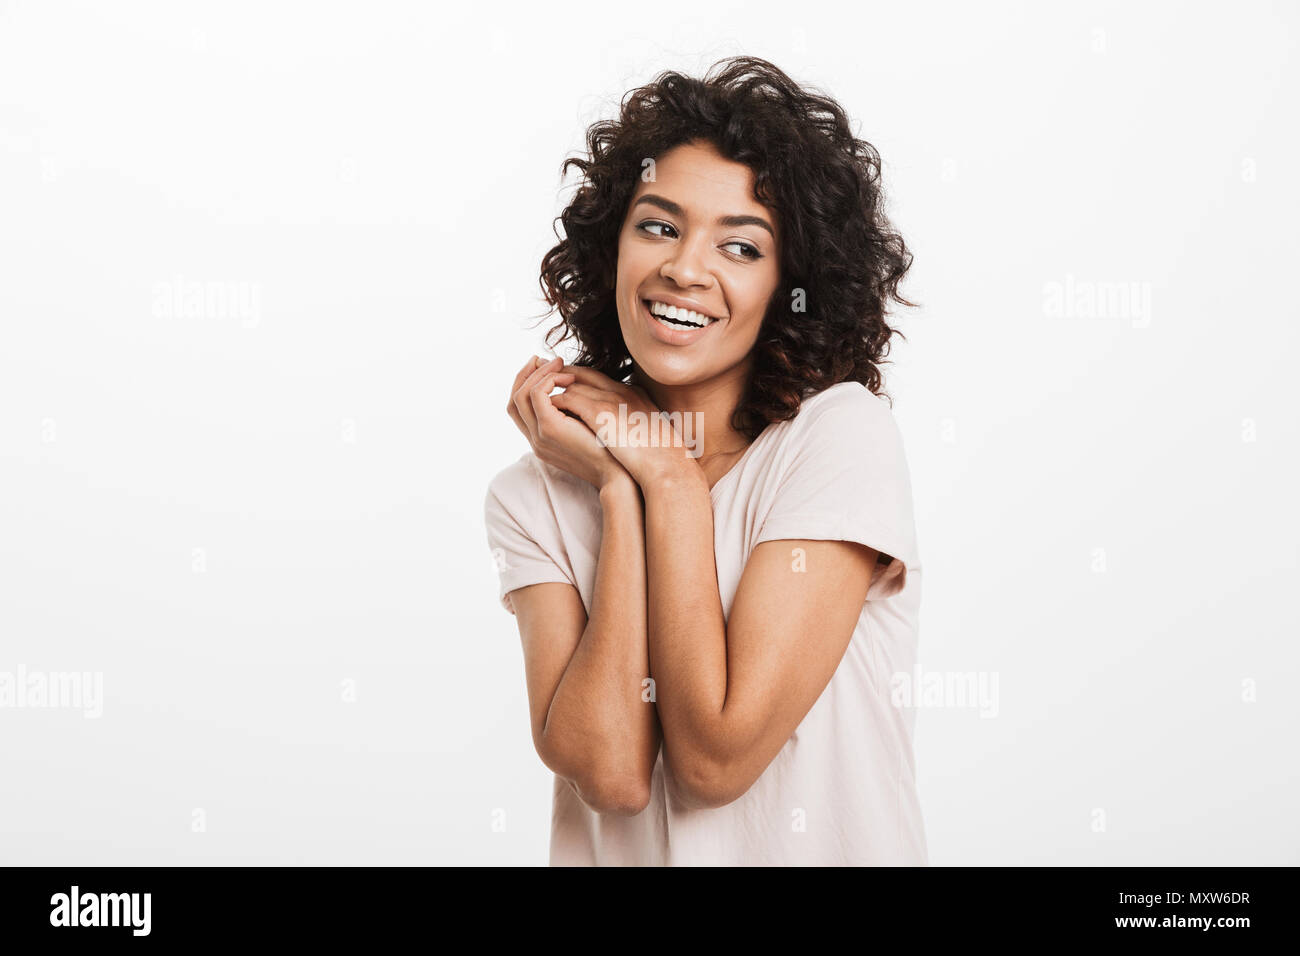 Portrait of beautiful american woman wearing jeans and t-shirt keeping arms together at chest and smiling isolated over white background Stock Photo